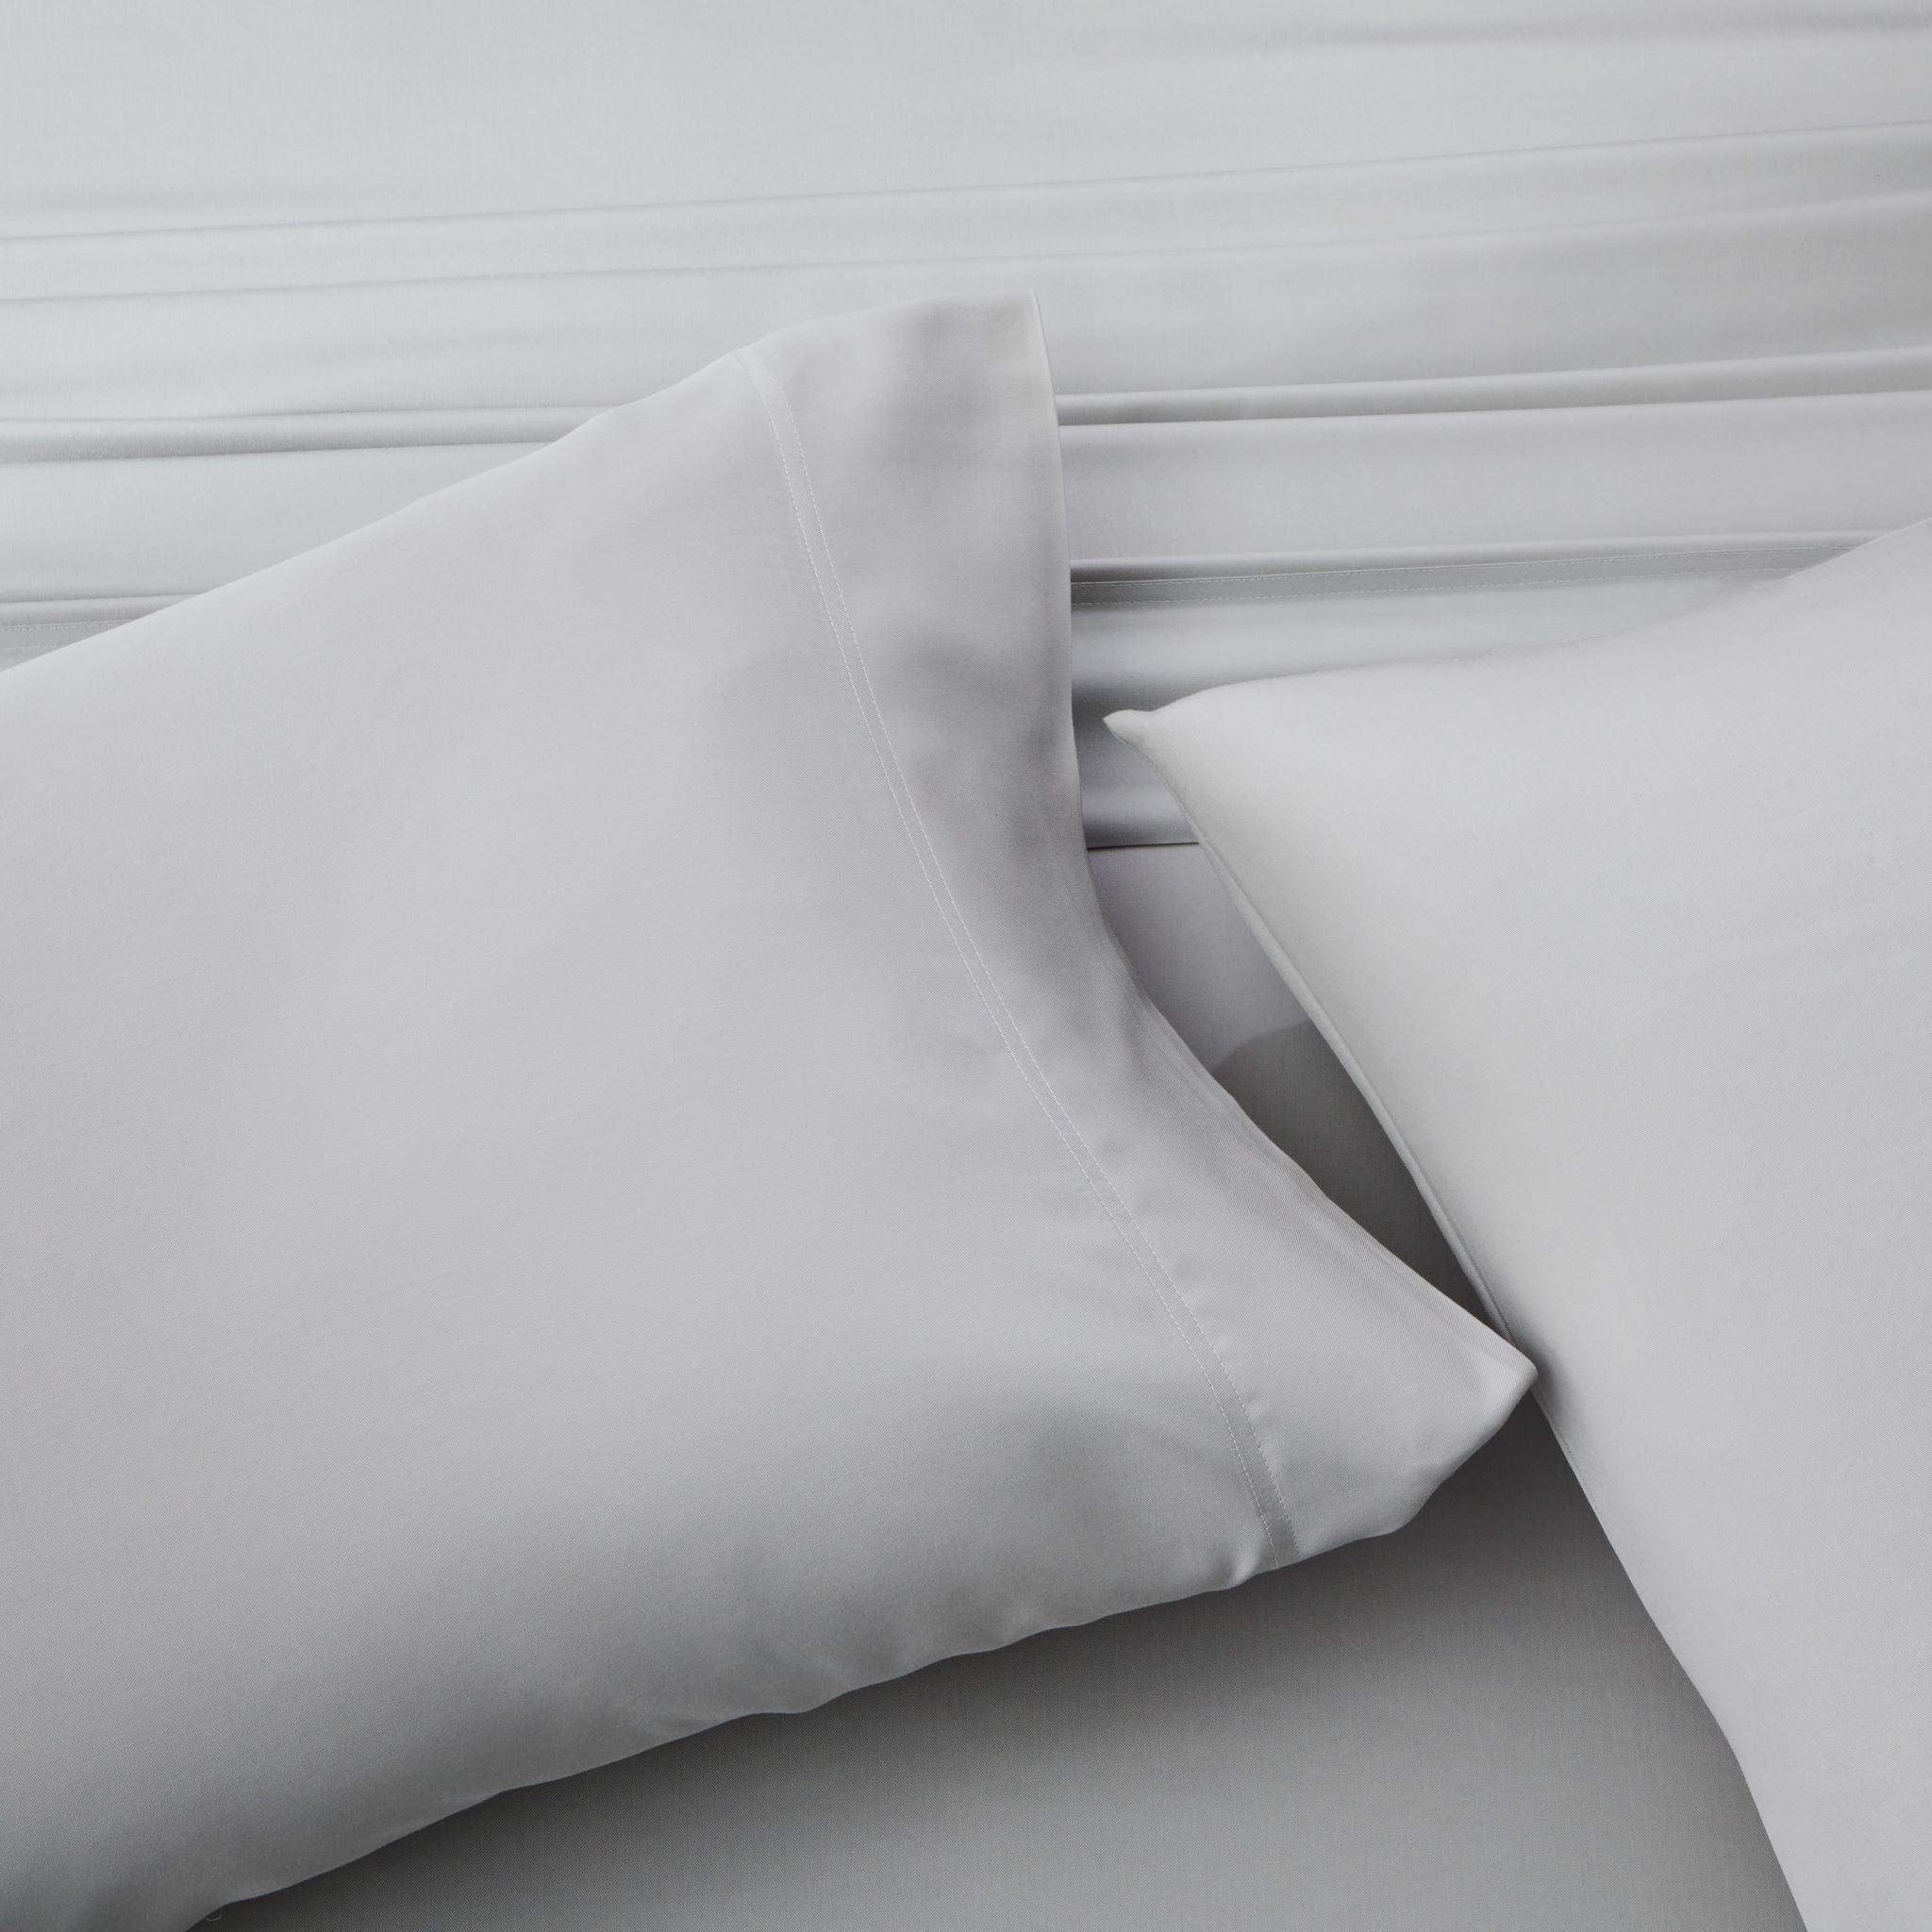 SLEEP EASY ON HYGGECAVE™ SUSTAINABLE BEDDING - HYGGE CAVE